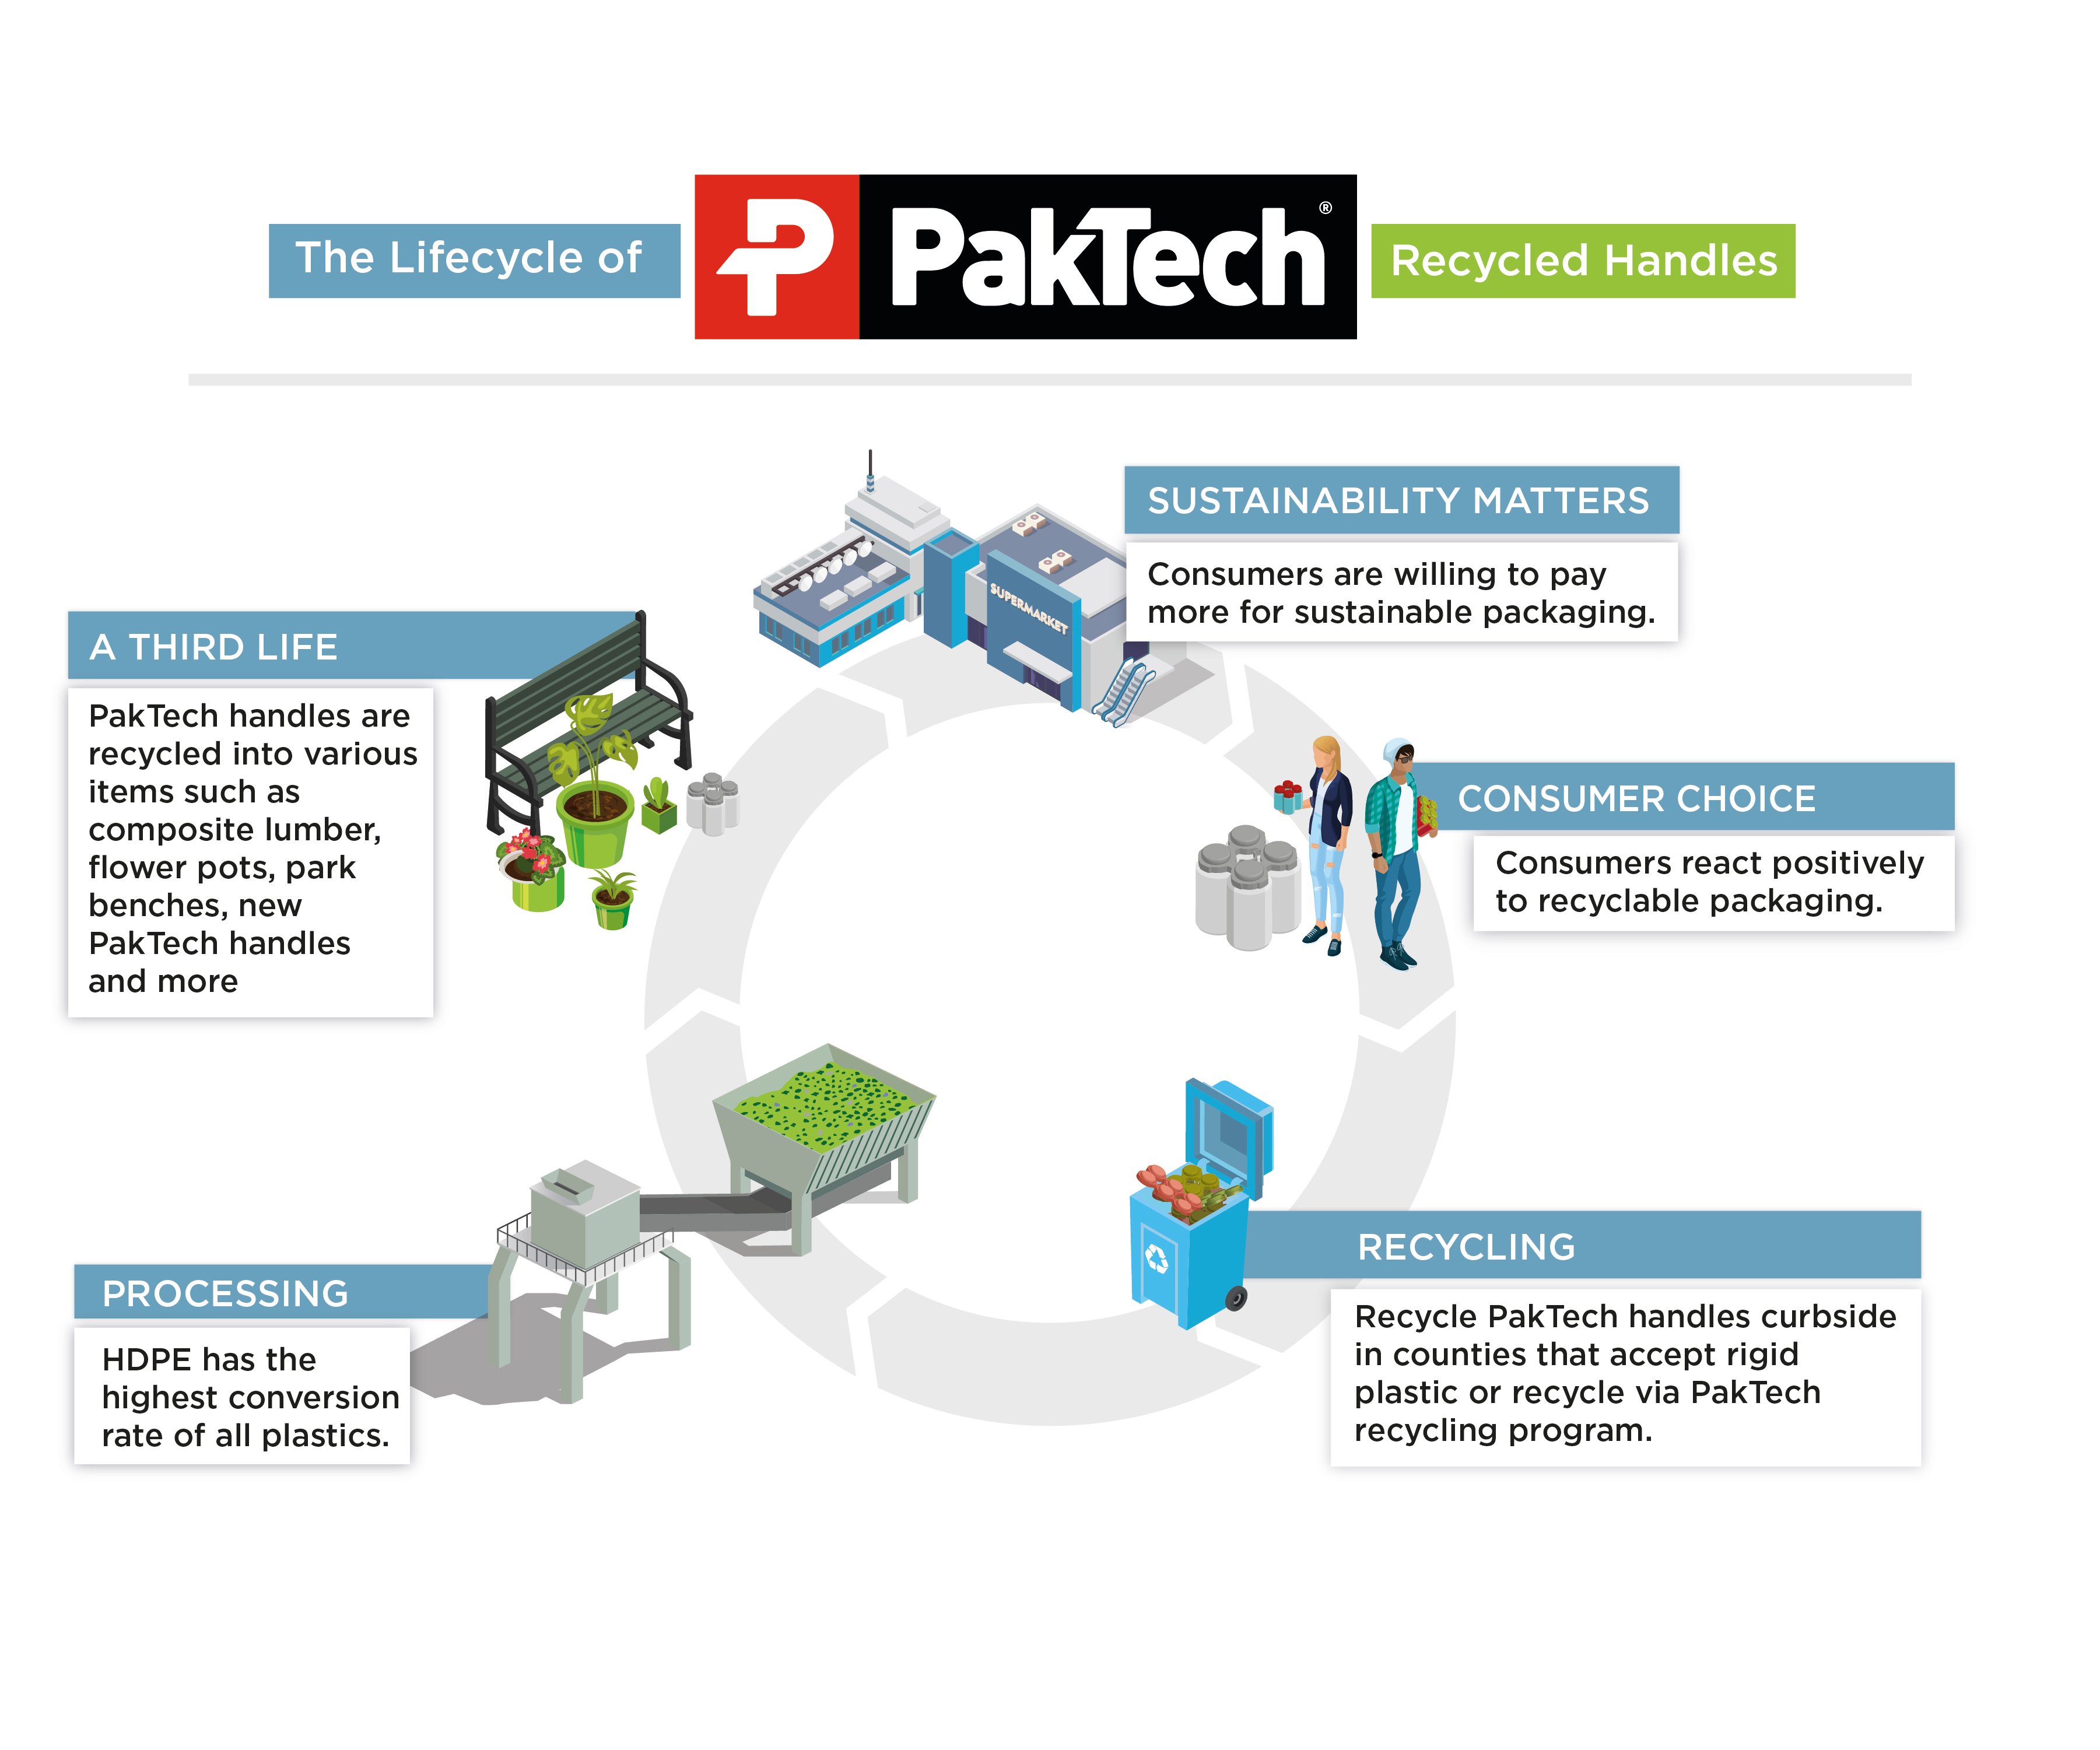 The Lifecycle of PakTech Recycled Handles